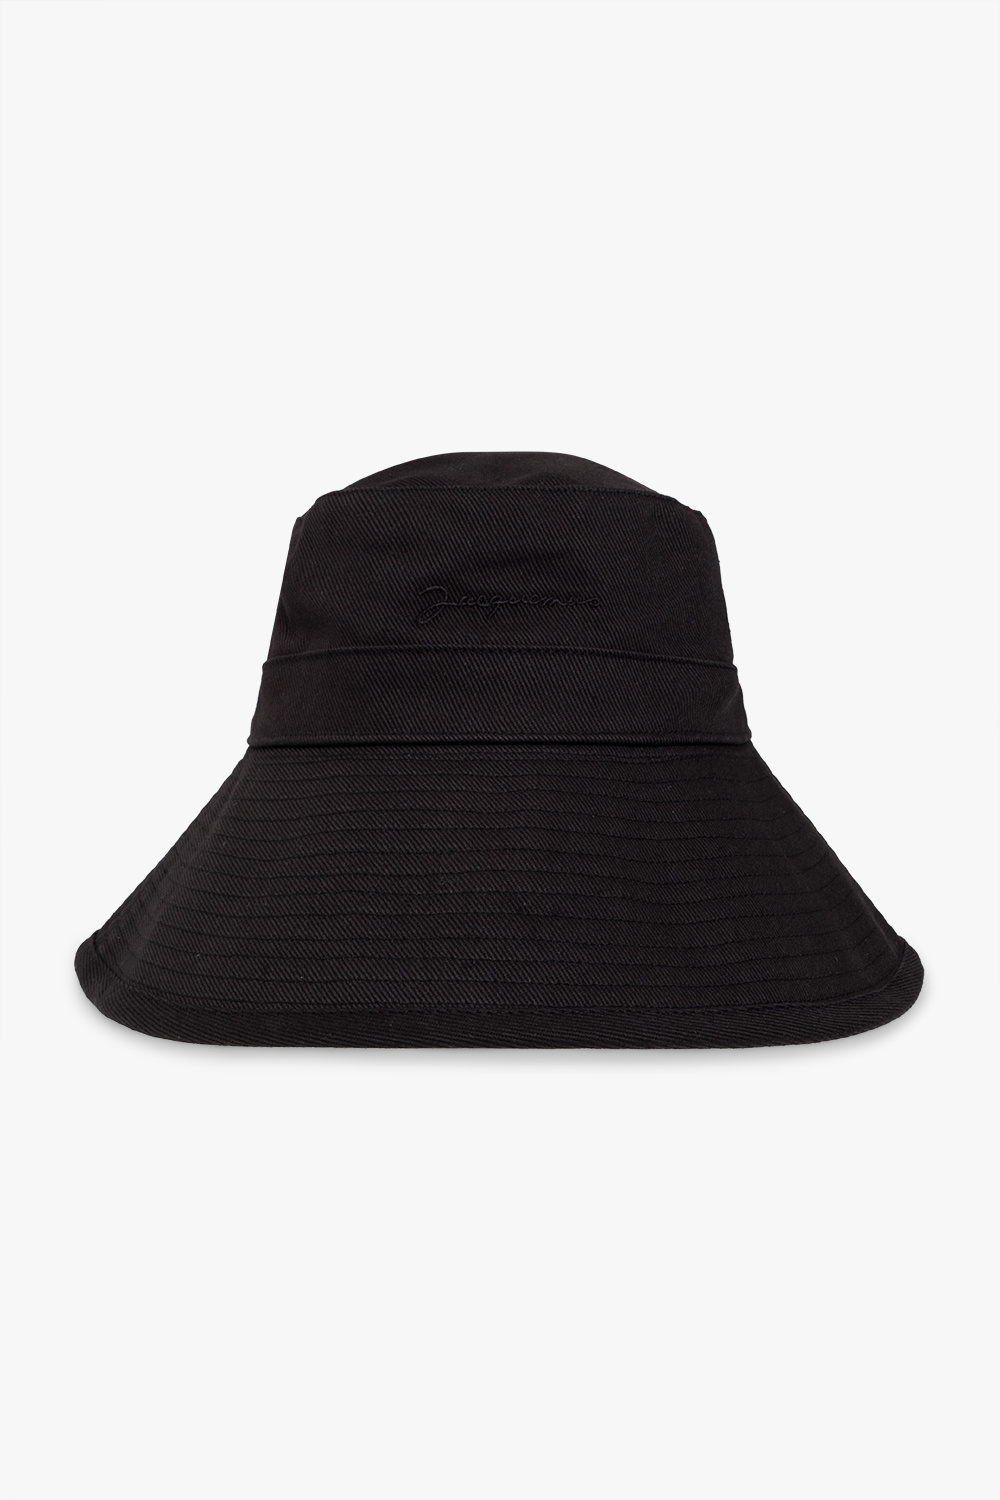 Jacquemus ‘Linu’ bucket hat with logo